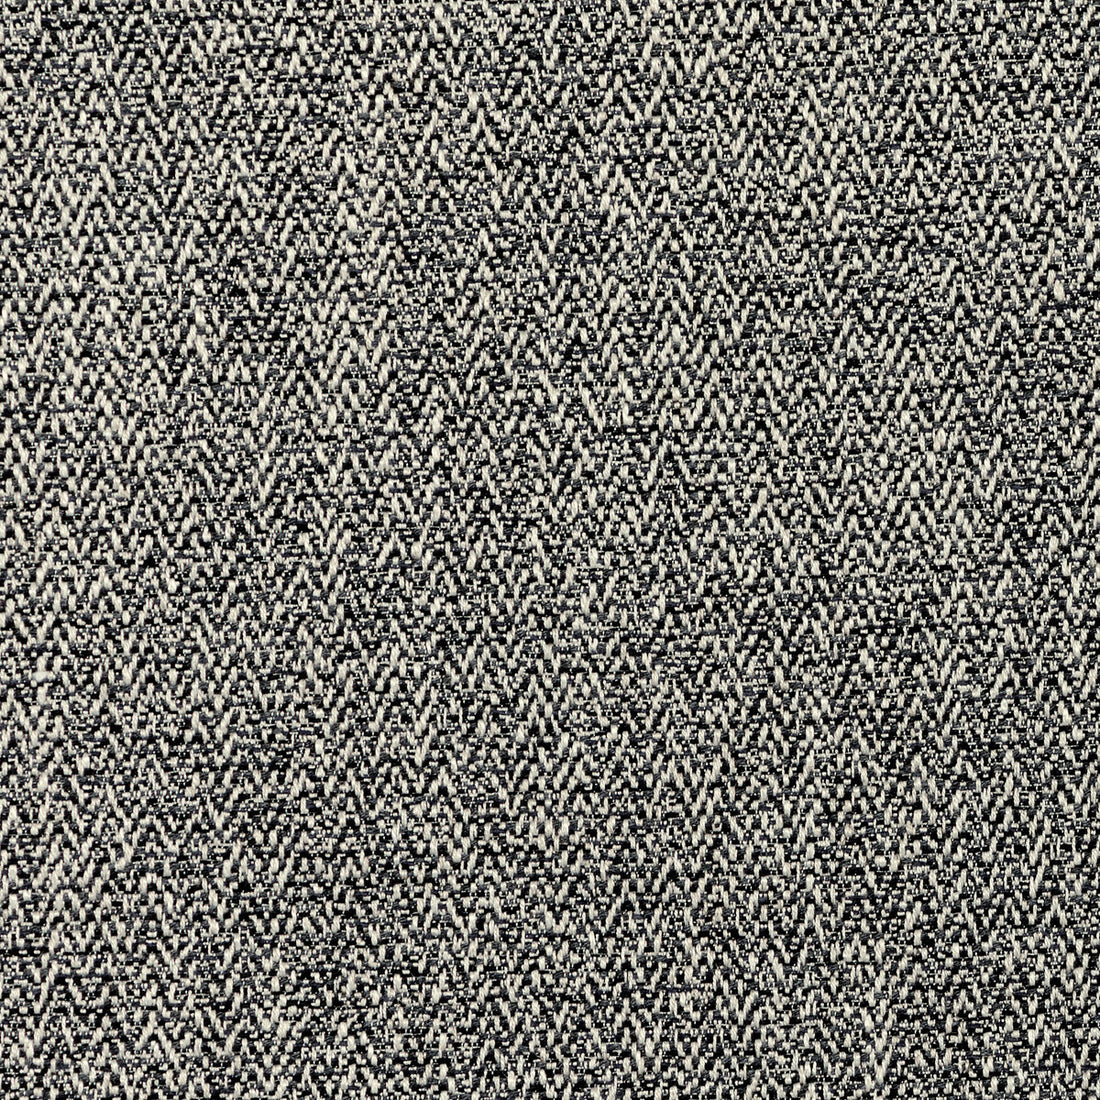 Saumur fabric in graphite color - pattern 36107.21.0 - by Kravet Couture in the Luxury Textures II collection